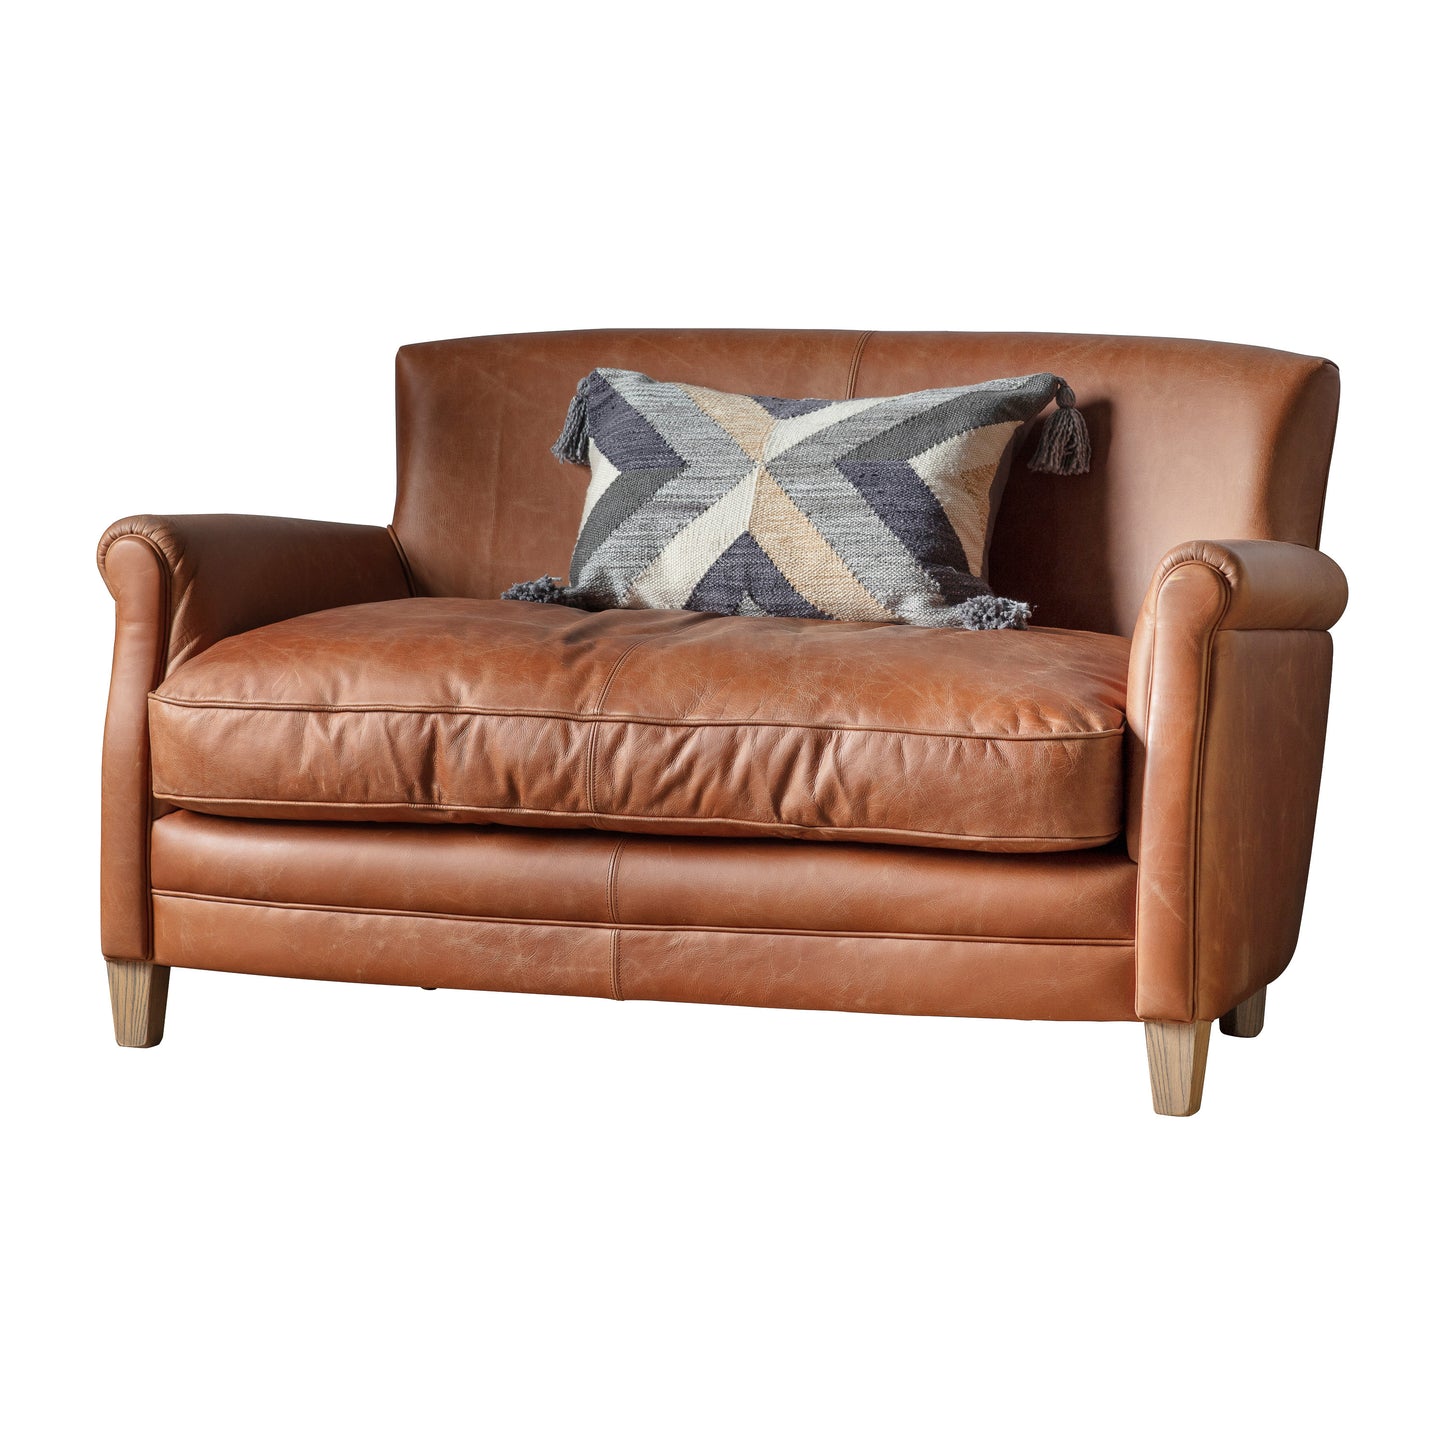 Interior decor, Home furniture: A vintage brown leather bear sofa featuring a geometric pillow sourced from Kikiathome.co.uk.